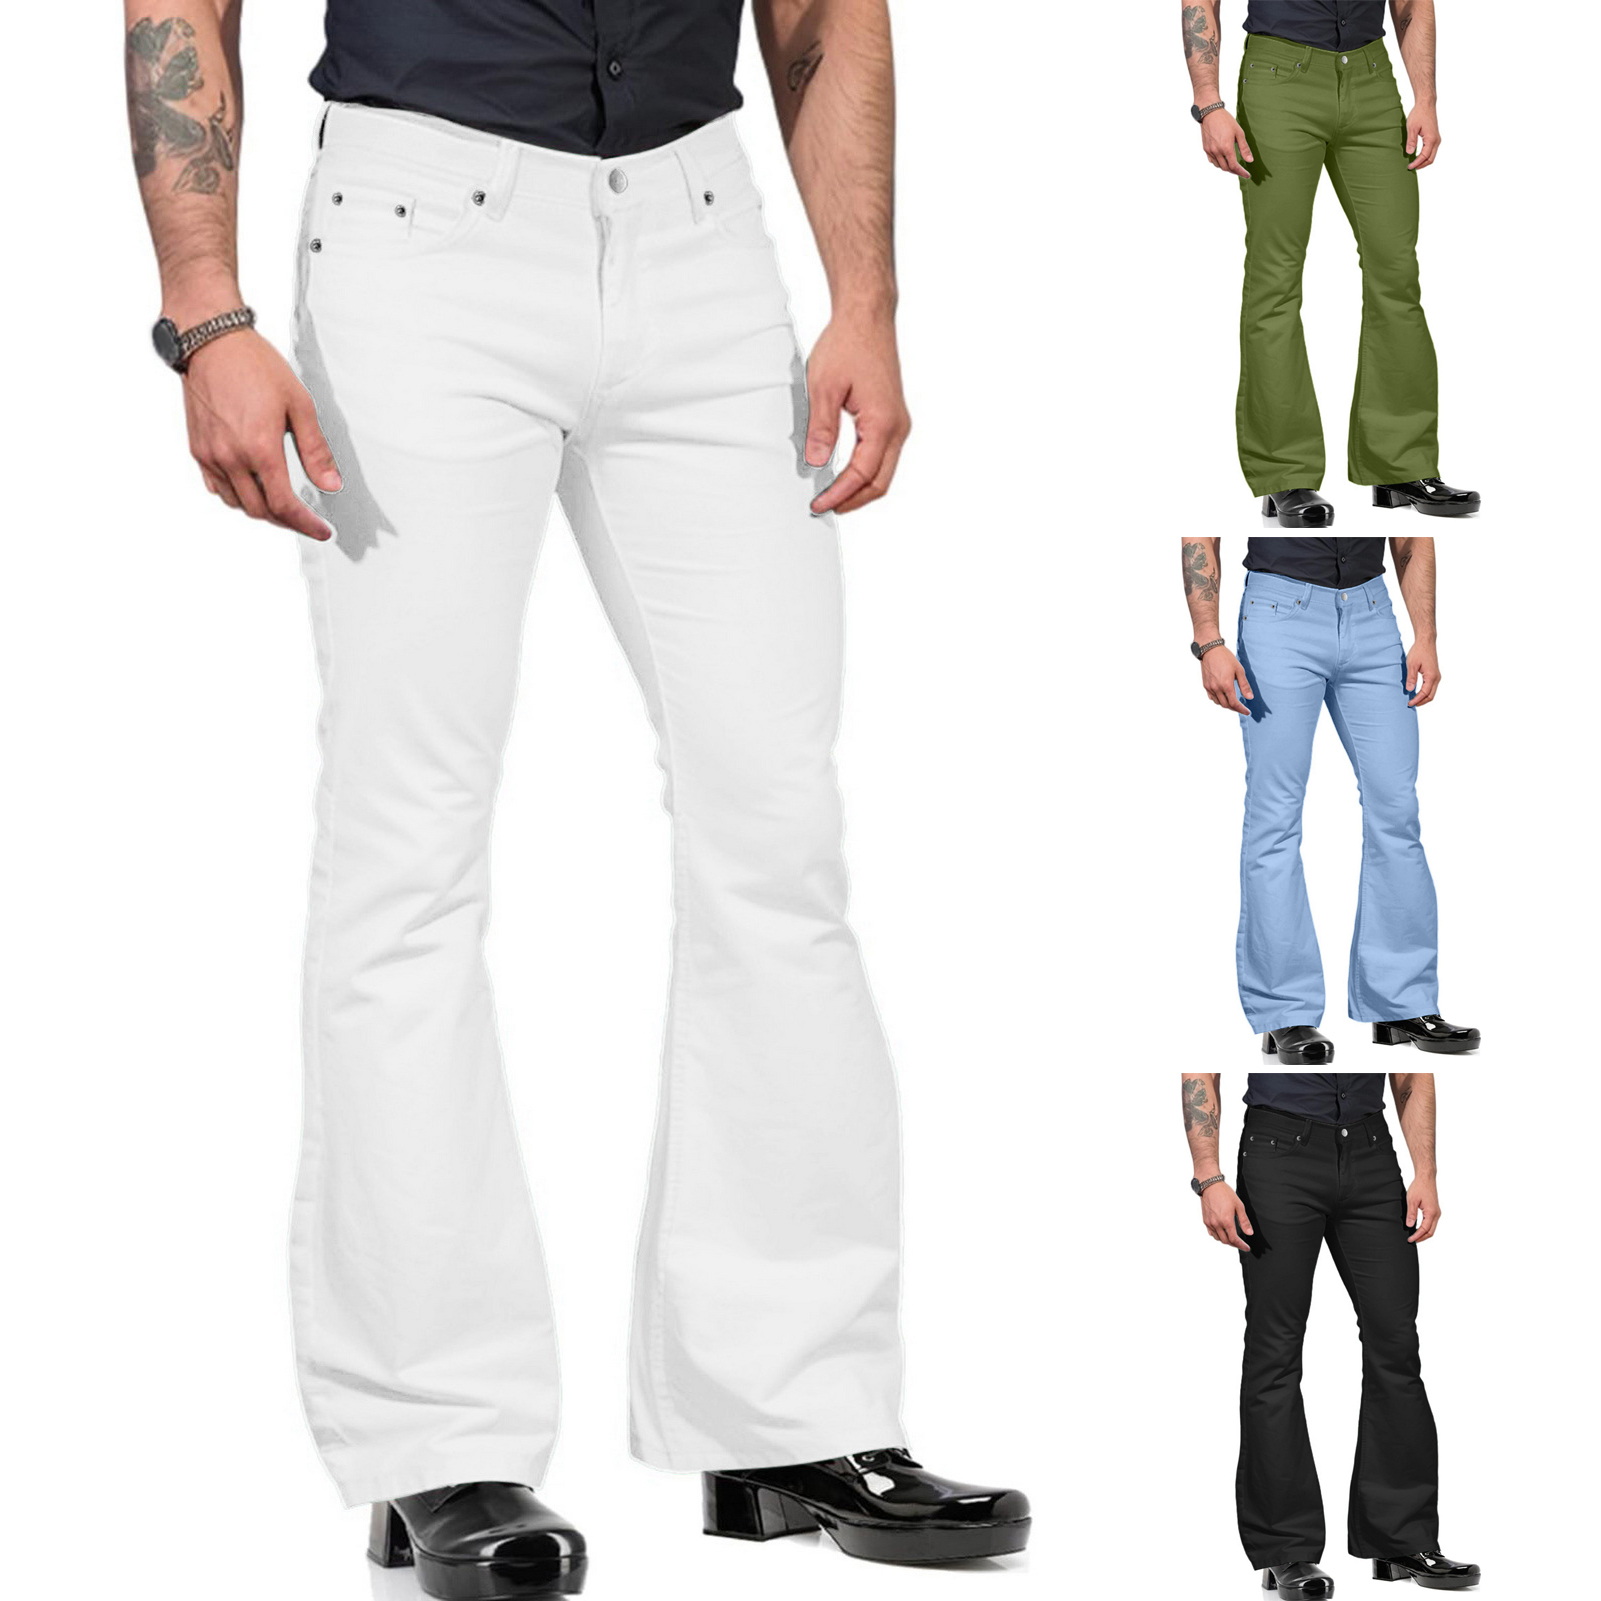 qiat MALL Men Bell Bottom Pants Flattering Bell Bottom Trousers Men's  Vintage Bell Bottom Jeans Stretchy Slim Fit Trousers for Fashionable